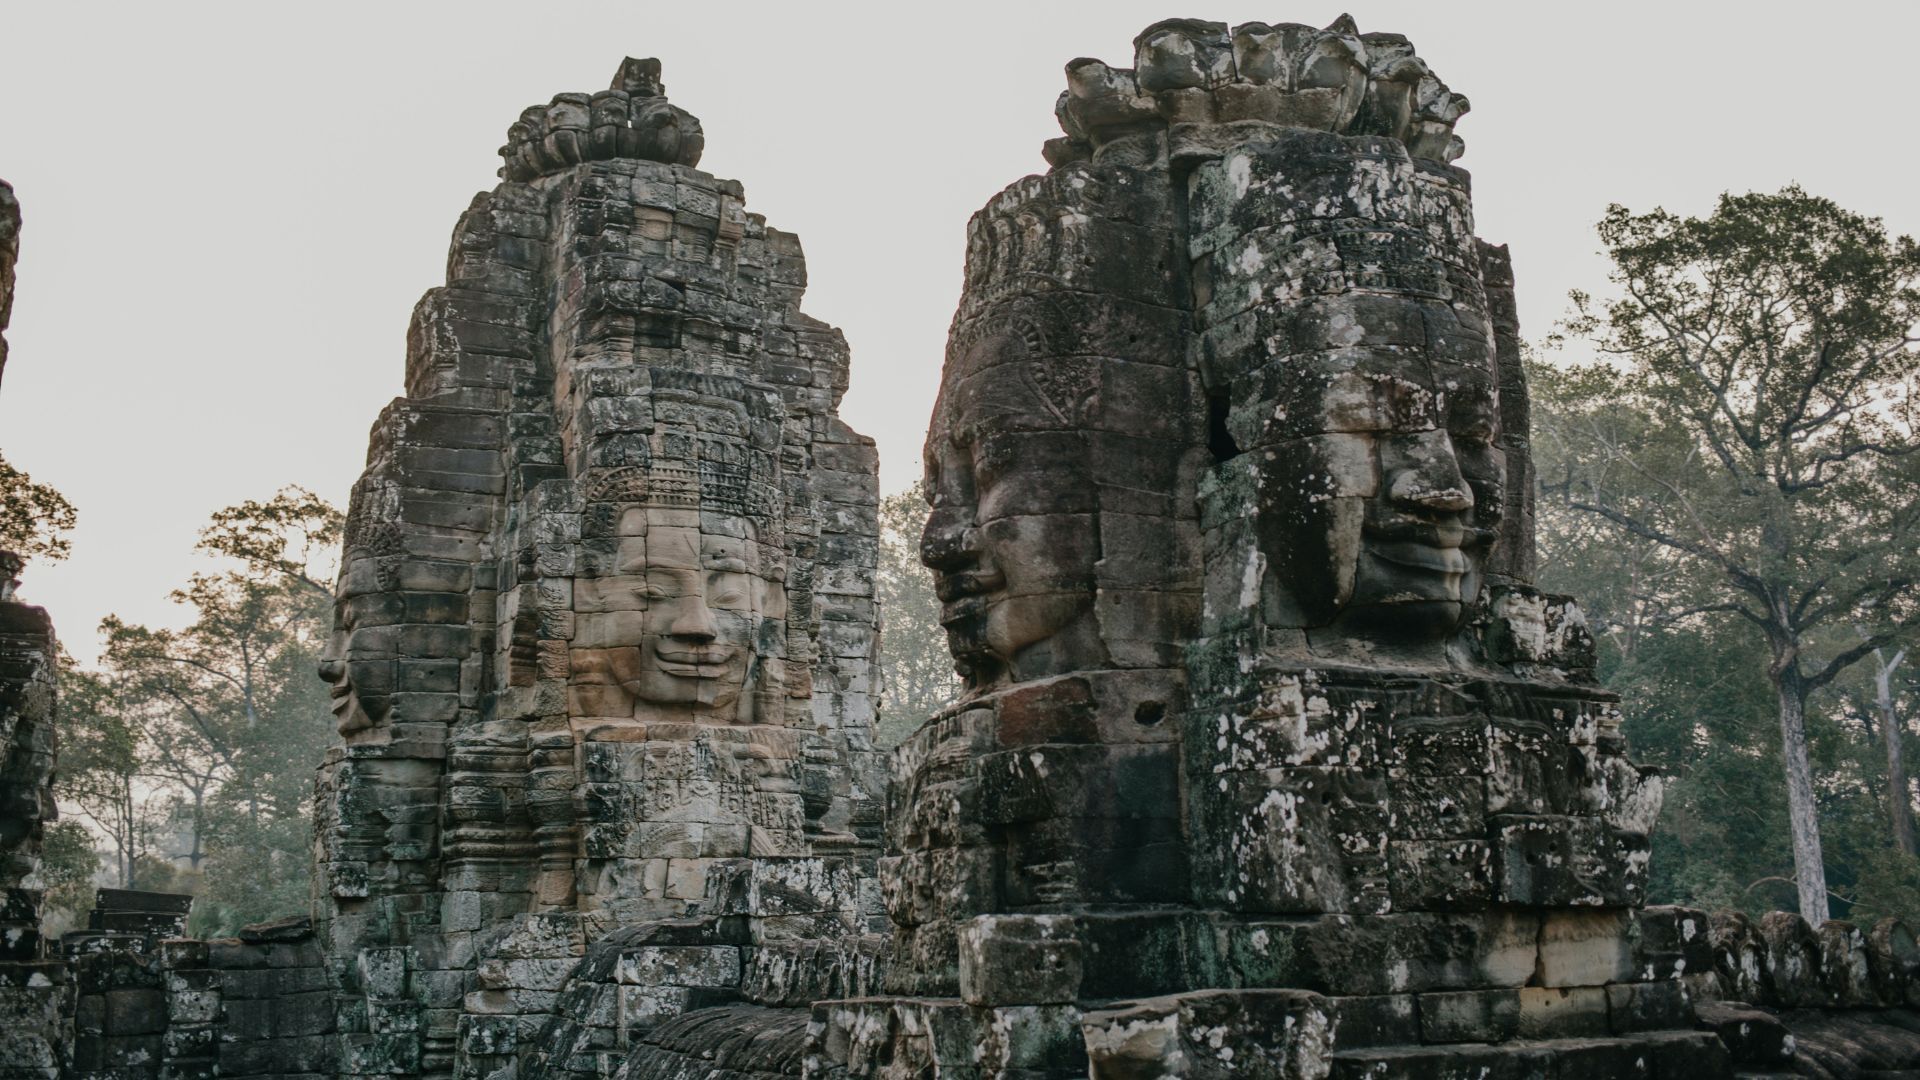 One of the most popular places to visit in siem reap